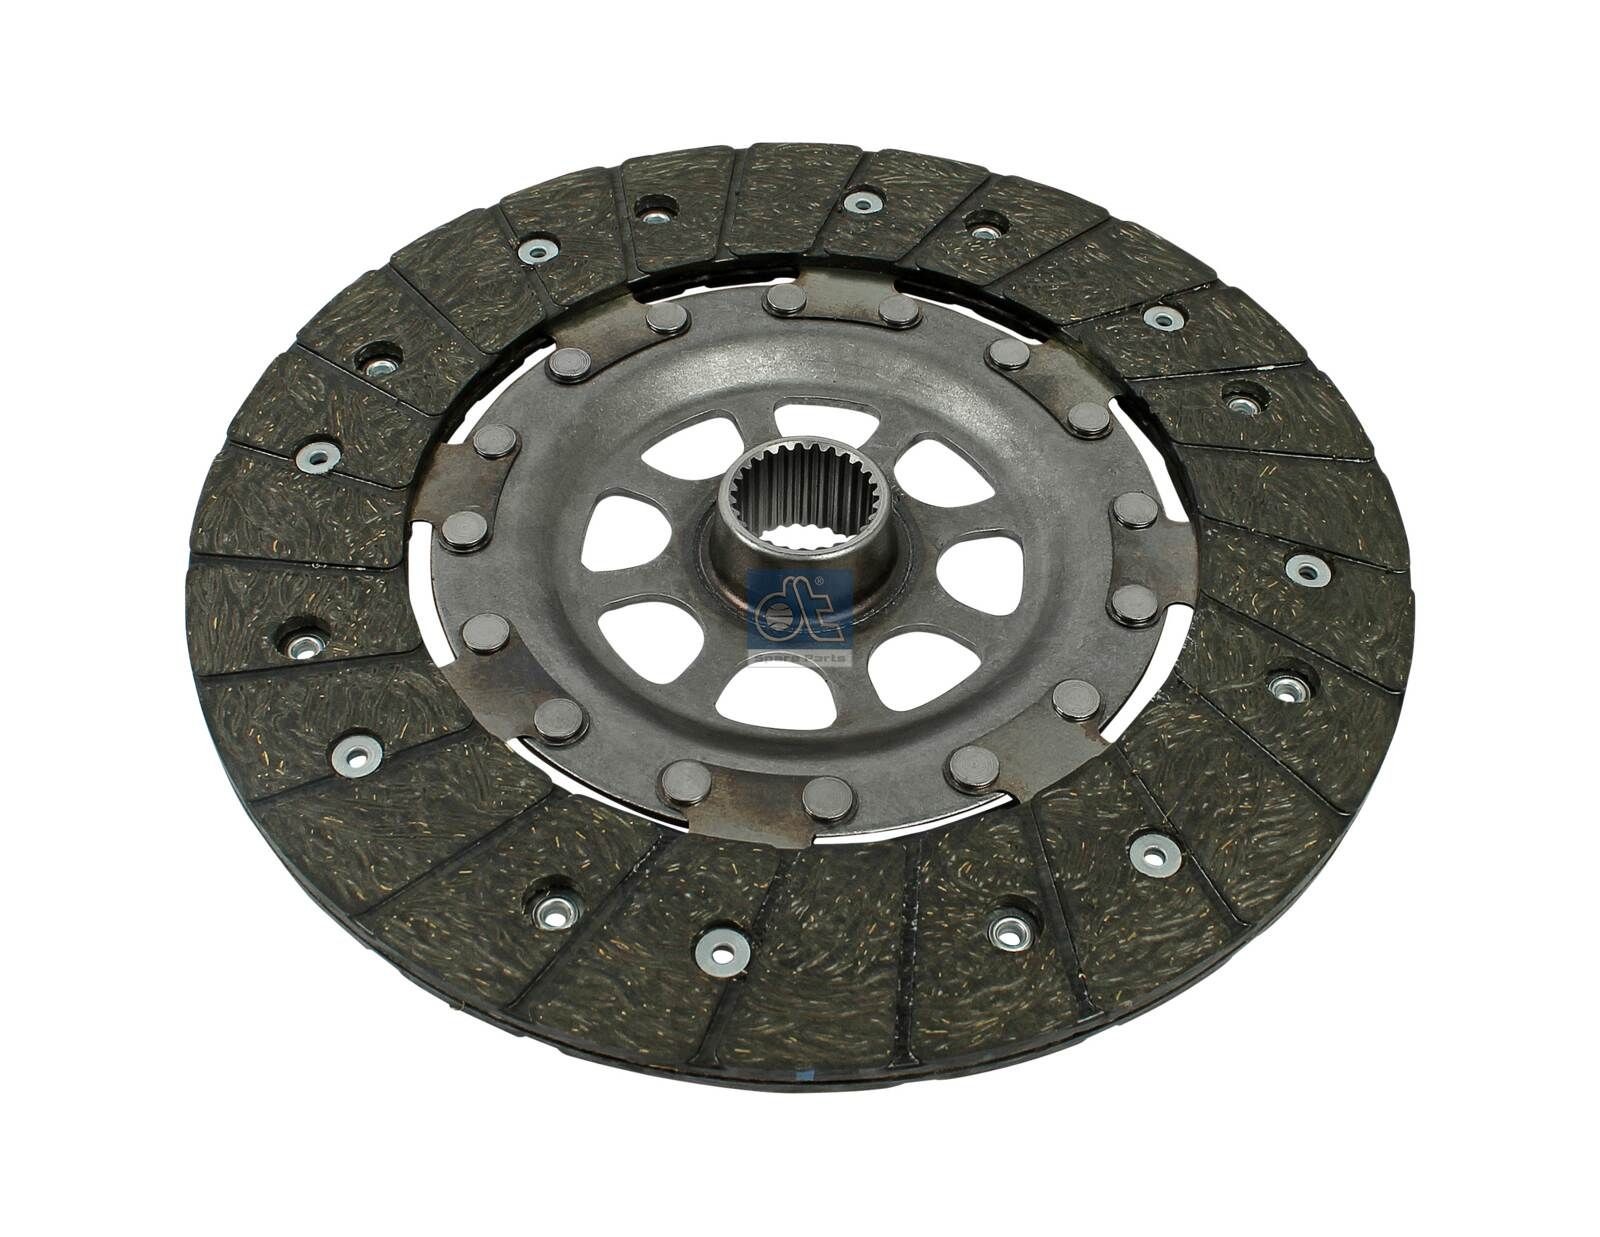 DT Spare Parts 11.17021 Clutch Disc 240mm, Number of Teeth: 26